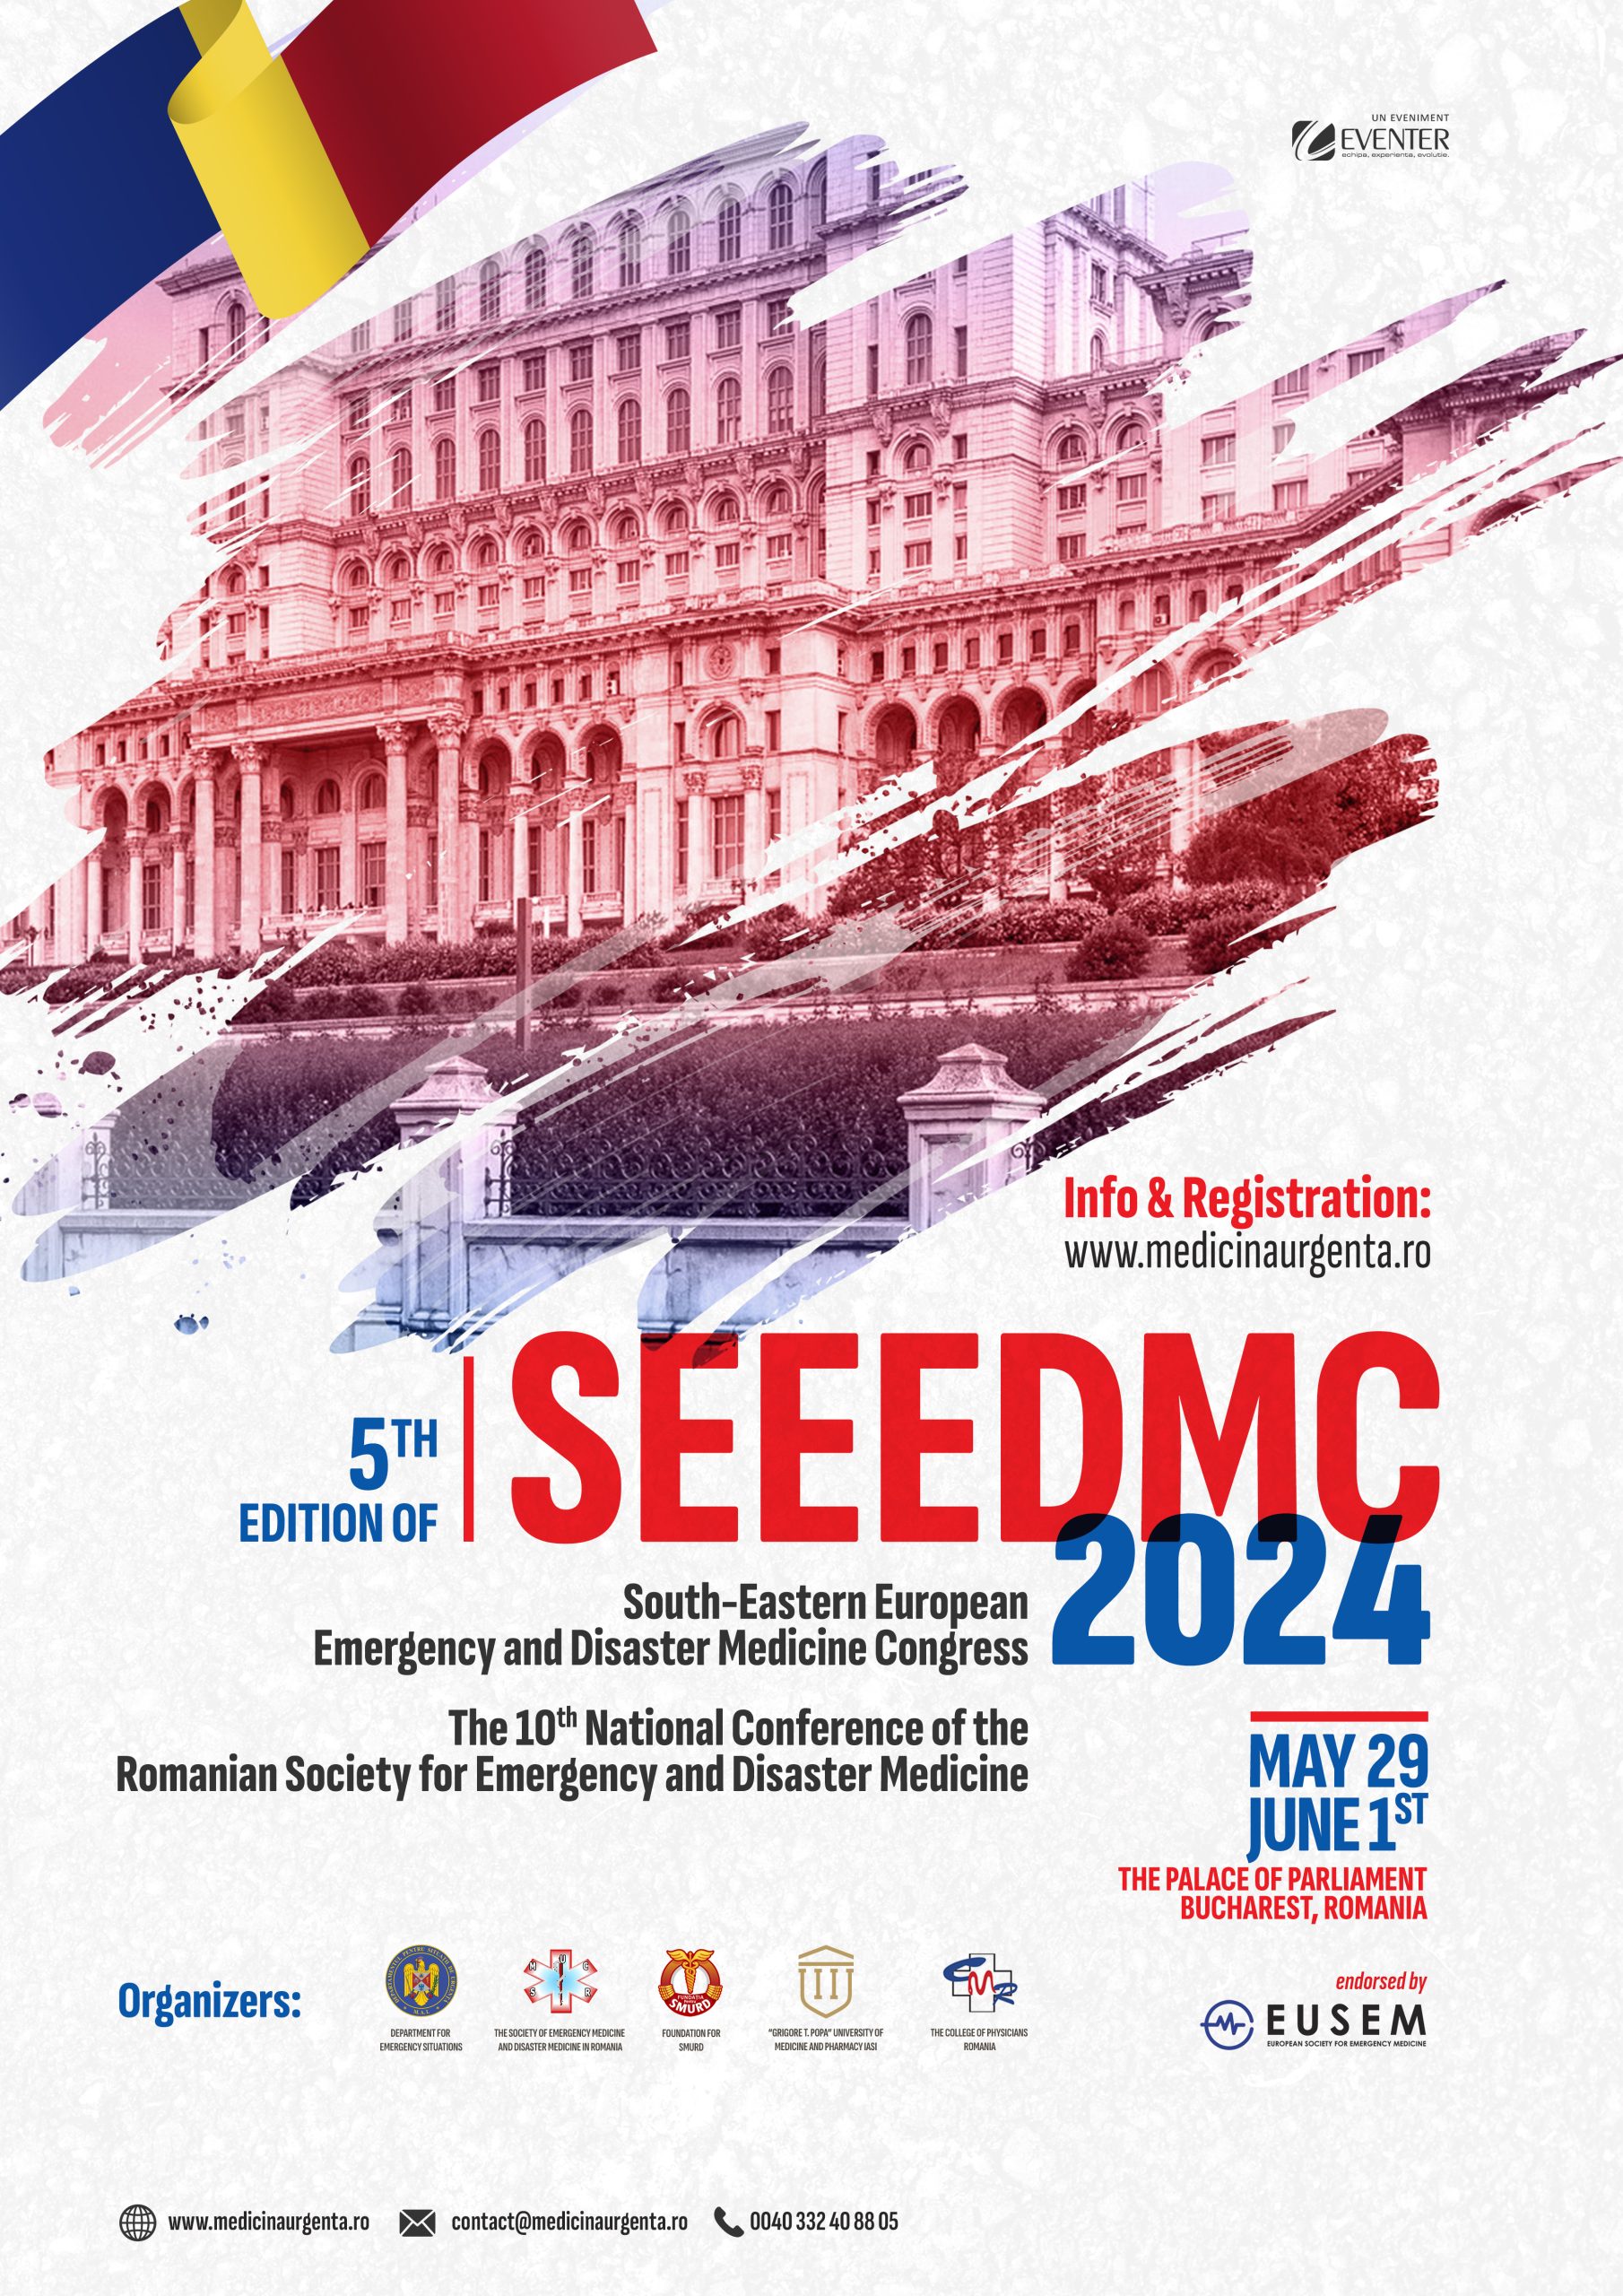 SEEEMDC 2024 – South-Eastern European Emergency Medicine and Disaster Congress